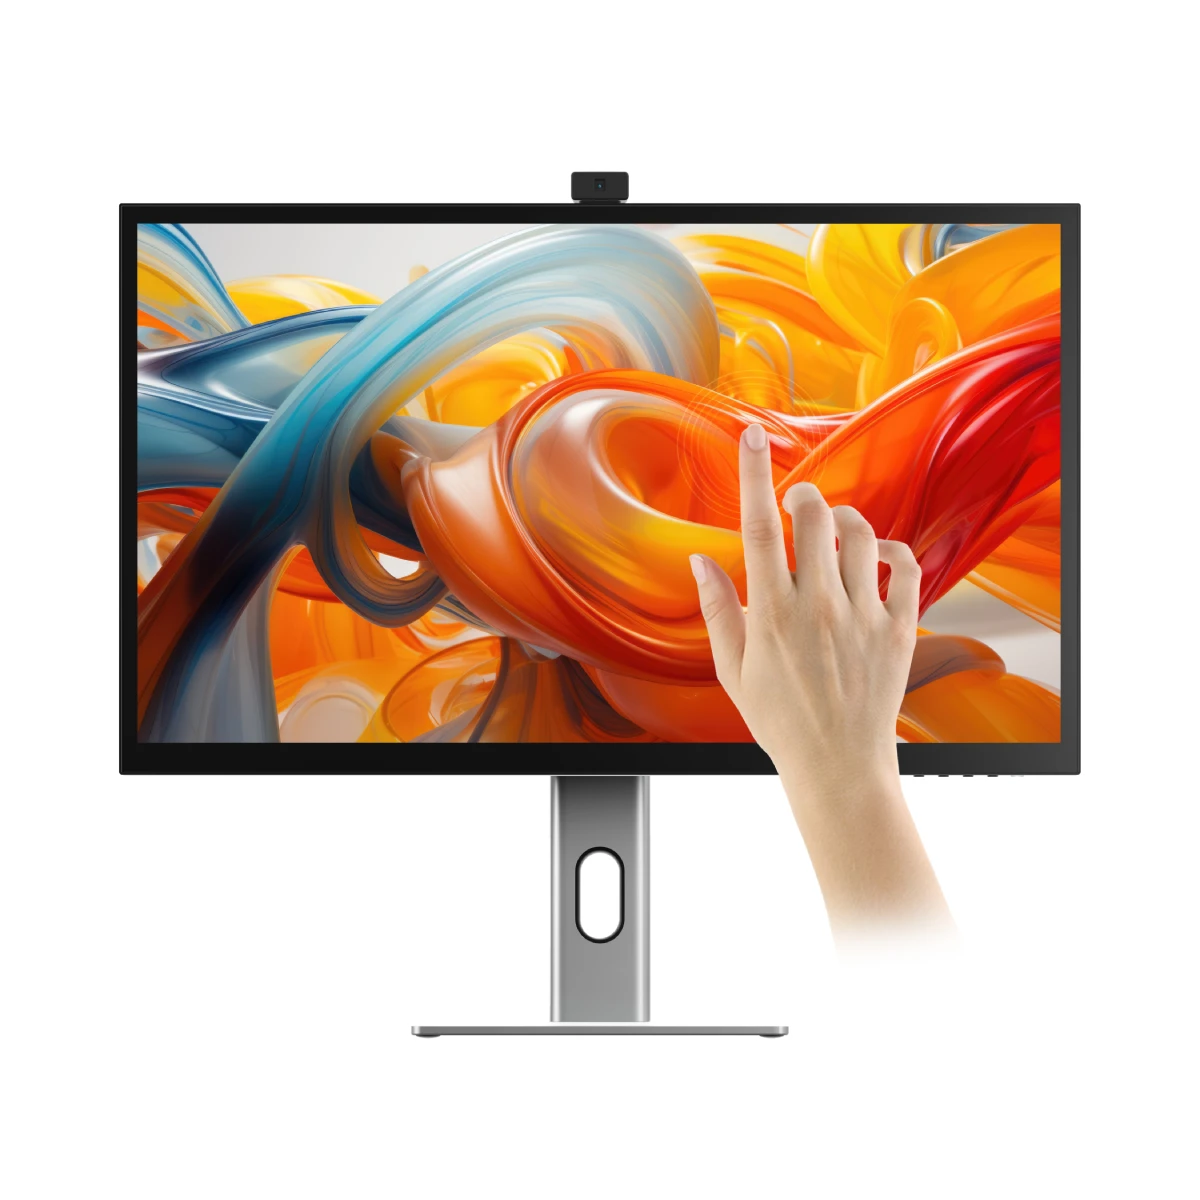 clarity-pro-touch-27-uhd-4k-monitor-with-65w-pd-webcam-and-touchscreen_1